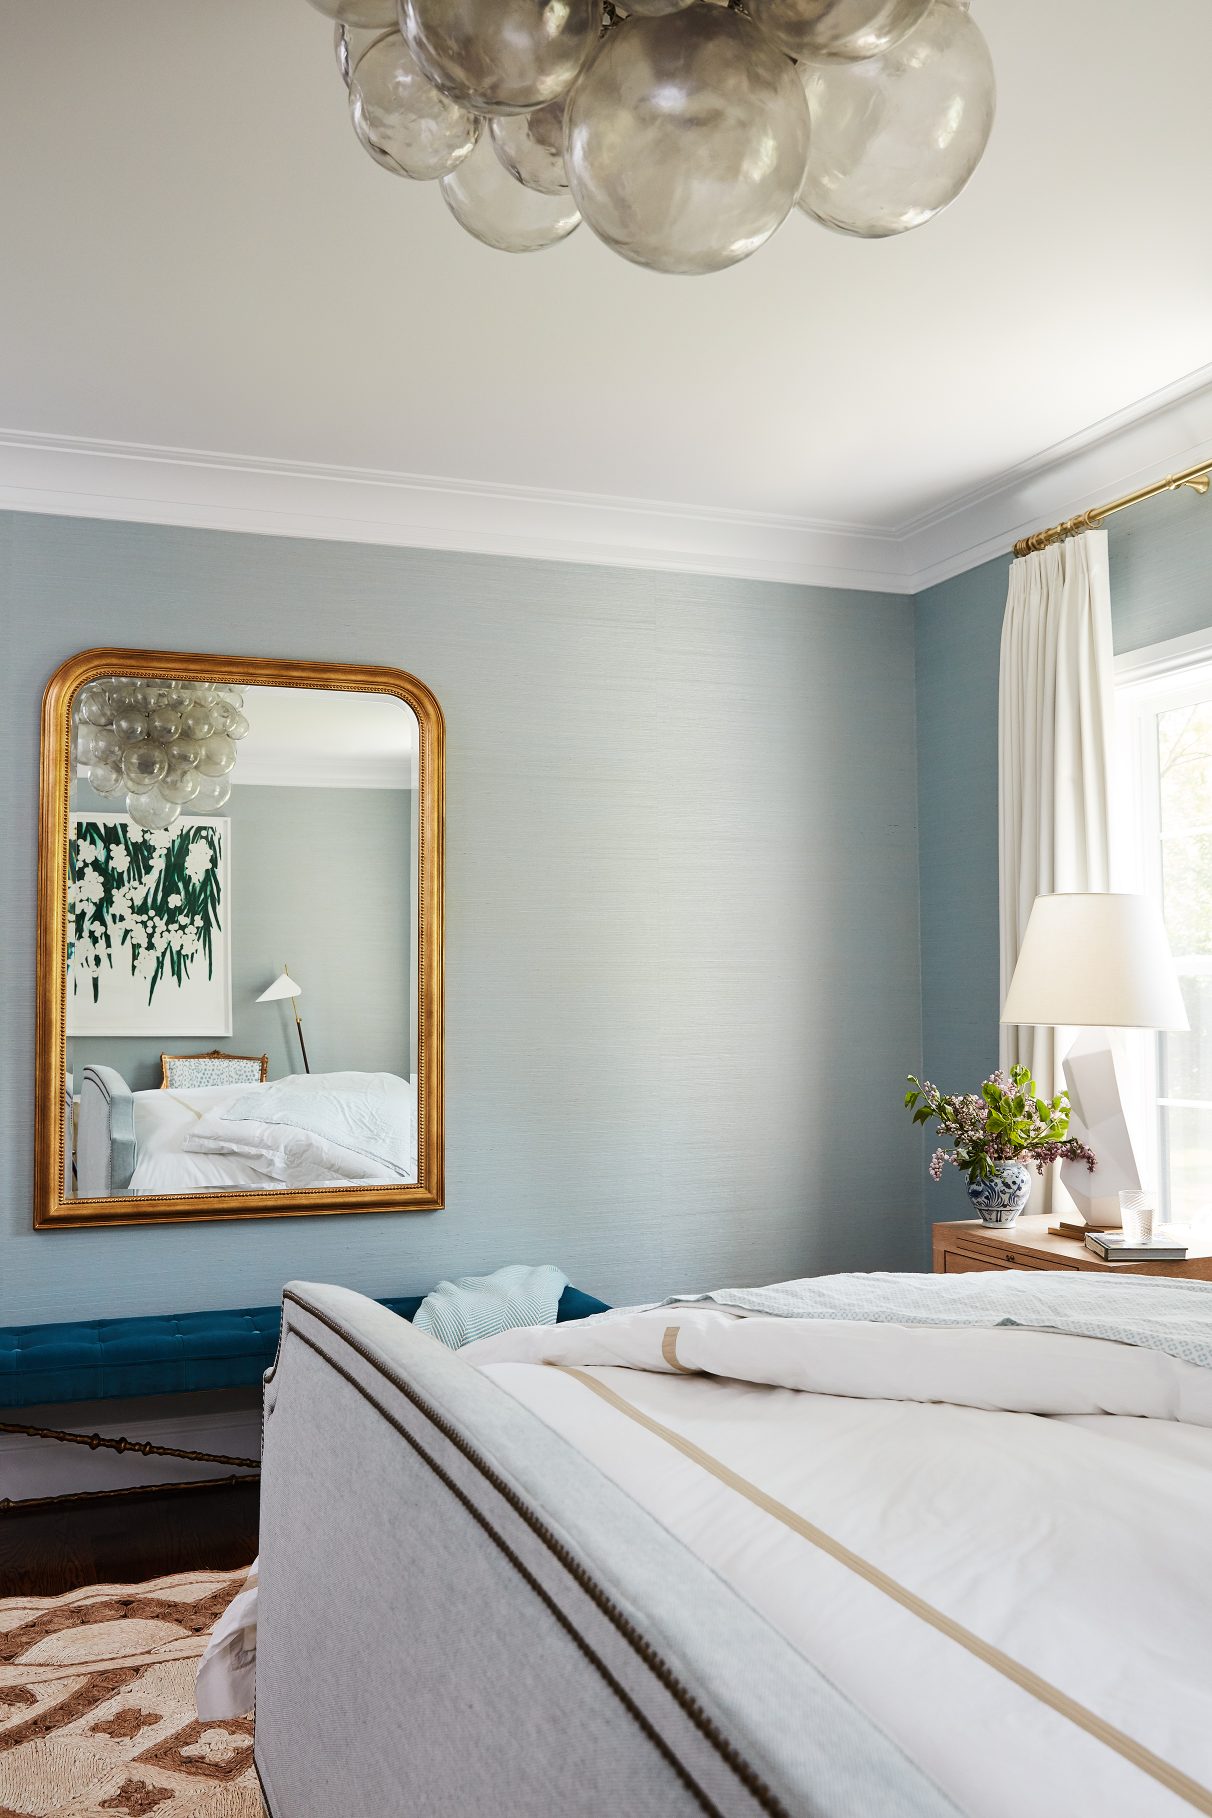 Middlebrook project: Bedroom mirror